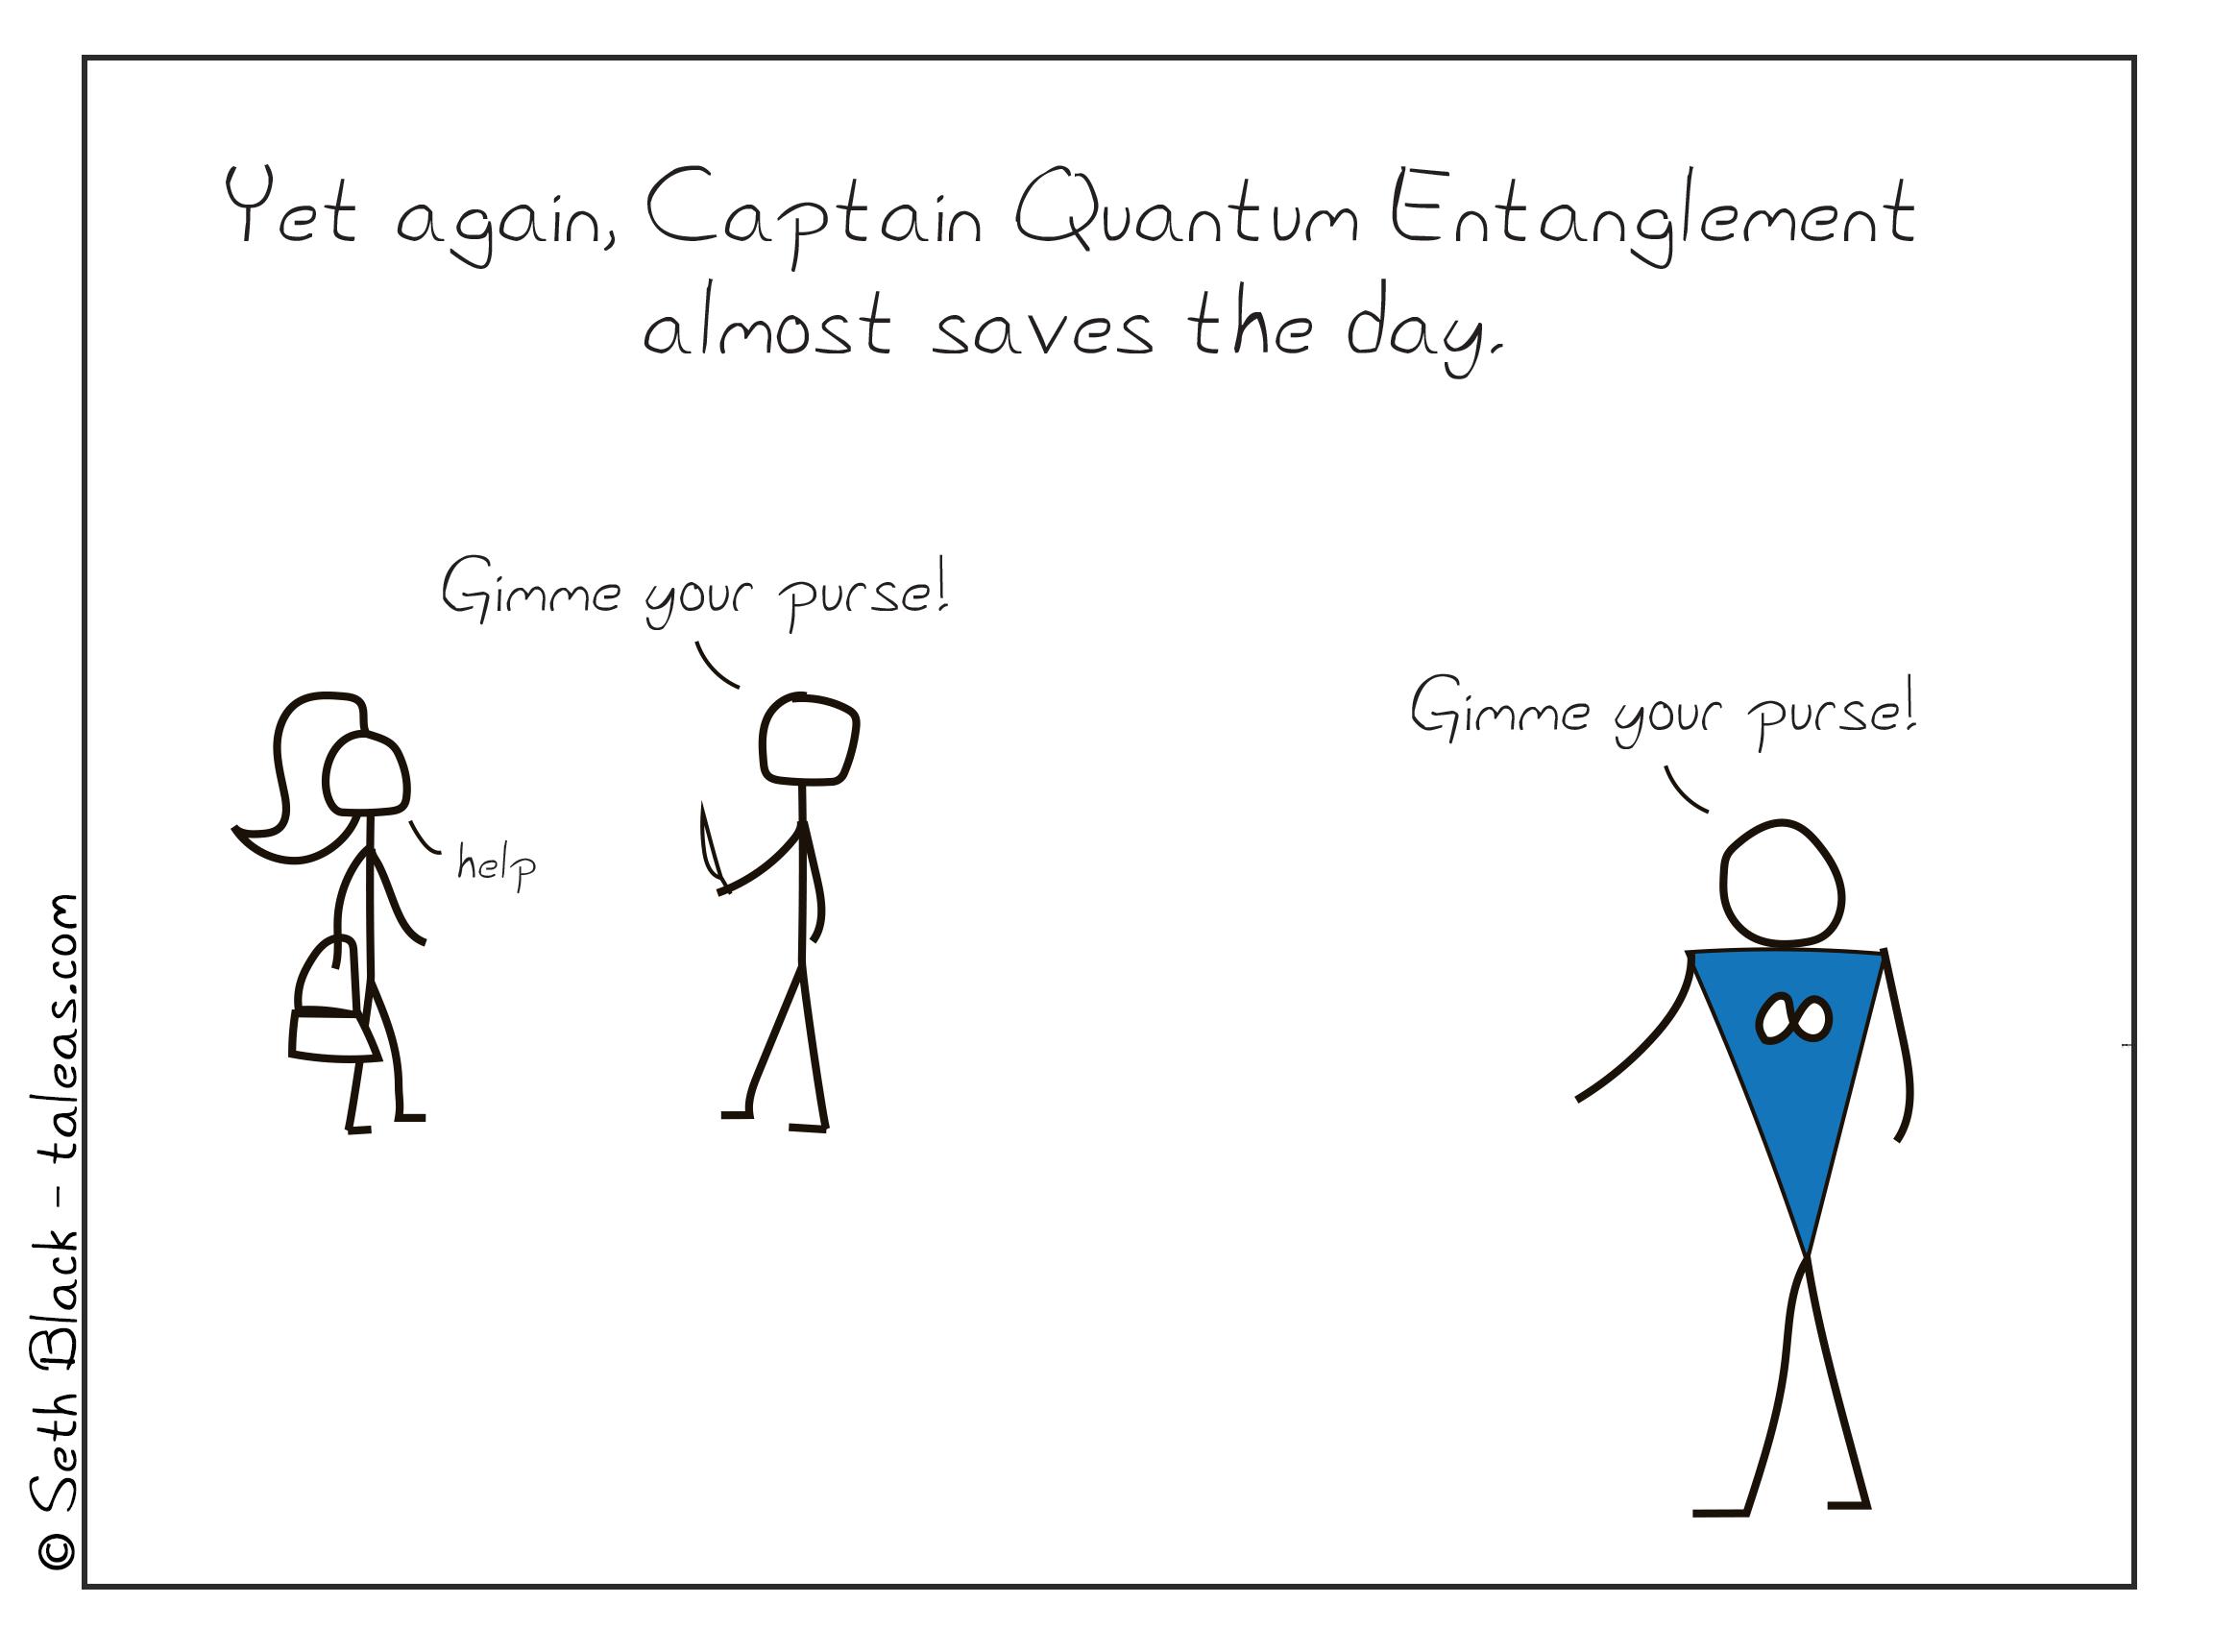 Yet again, Captain Quantum Entanglement almost saves the day. A robber is mugging a woman attempting to steal her purse saying, "Gimme your purse!". Unfortunately, Captain Quantum Entanglement is remotely entangled with the robber, and is also yelling "Gimme your purse".